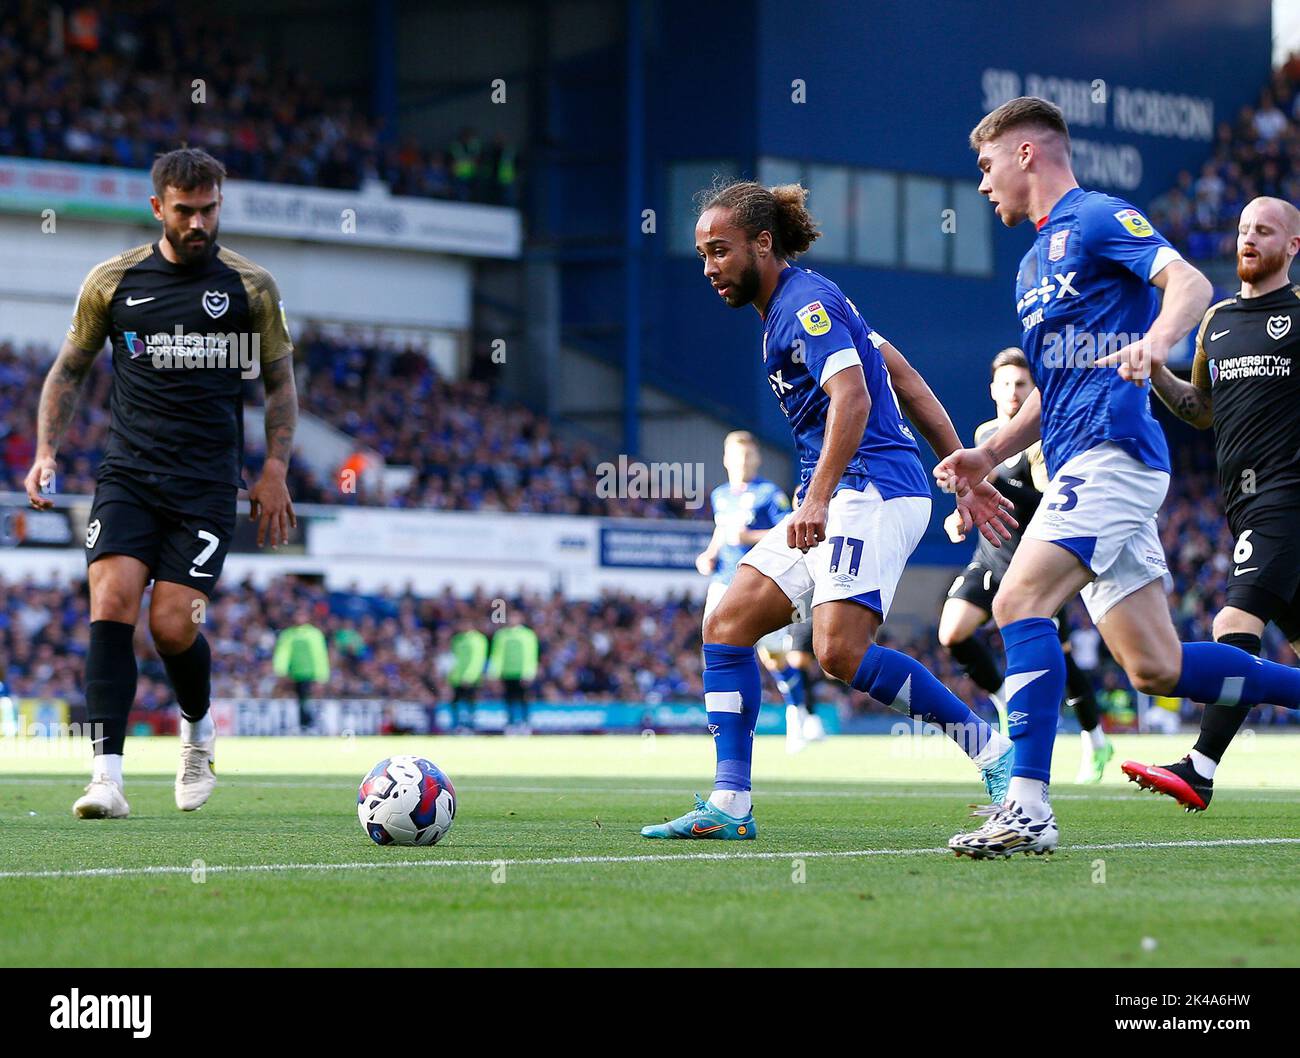 Ipswich, UK. 01st Oct, 2022. Marcus Harness of Ipswich Town lays the ball off to Leif Davis of Ipswich Town during the Sky Bet League One match between Ipswich Town and Portsmouth at Portman Road on October 1st 2022 in Ipswich, England. (Photo by Mick Kearns/phcimages.com) Credit: PHC Images/Alamy Live News Stock Photo